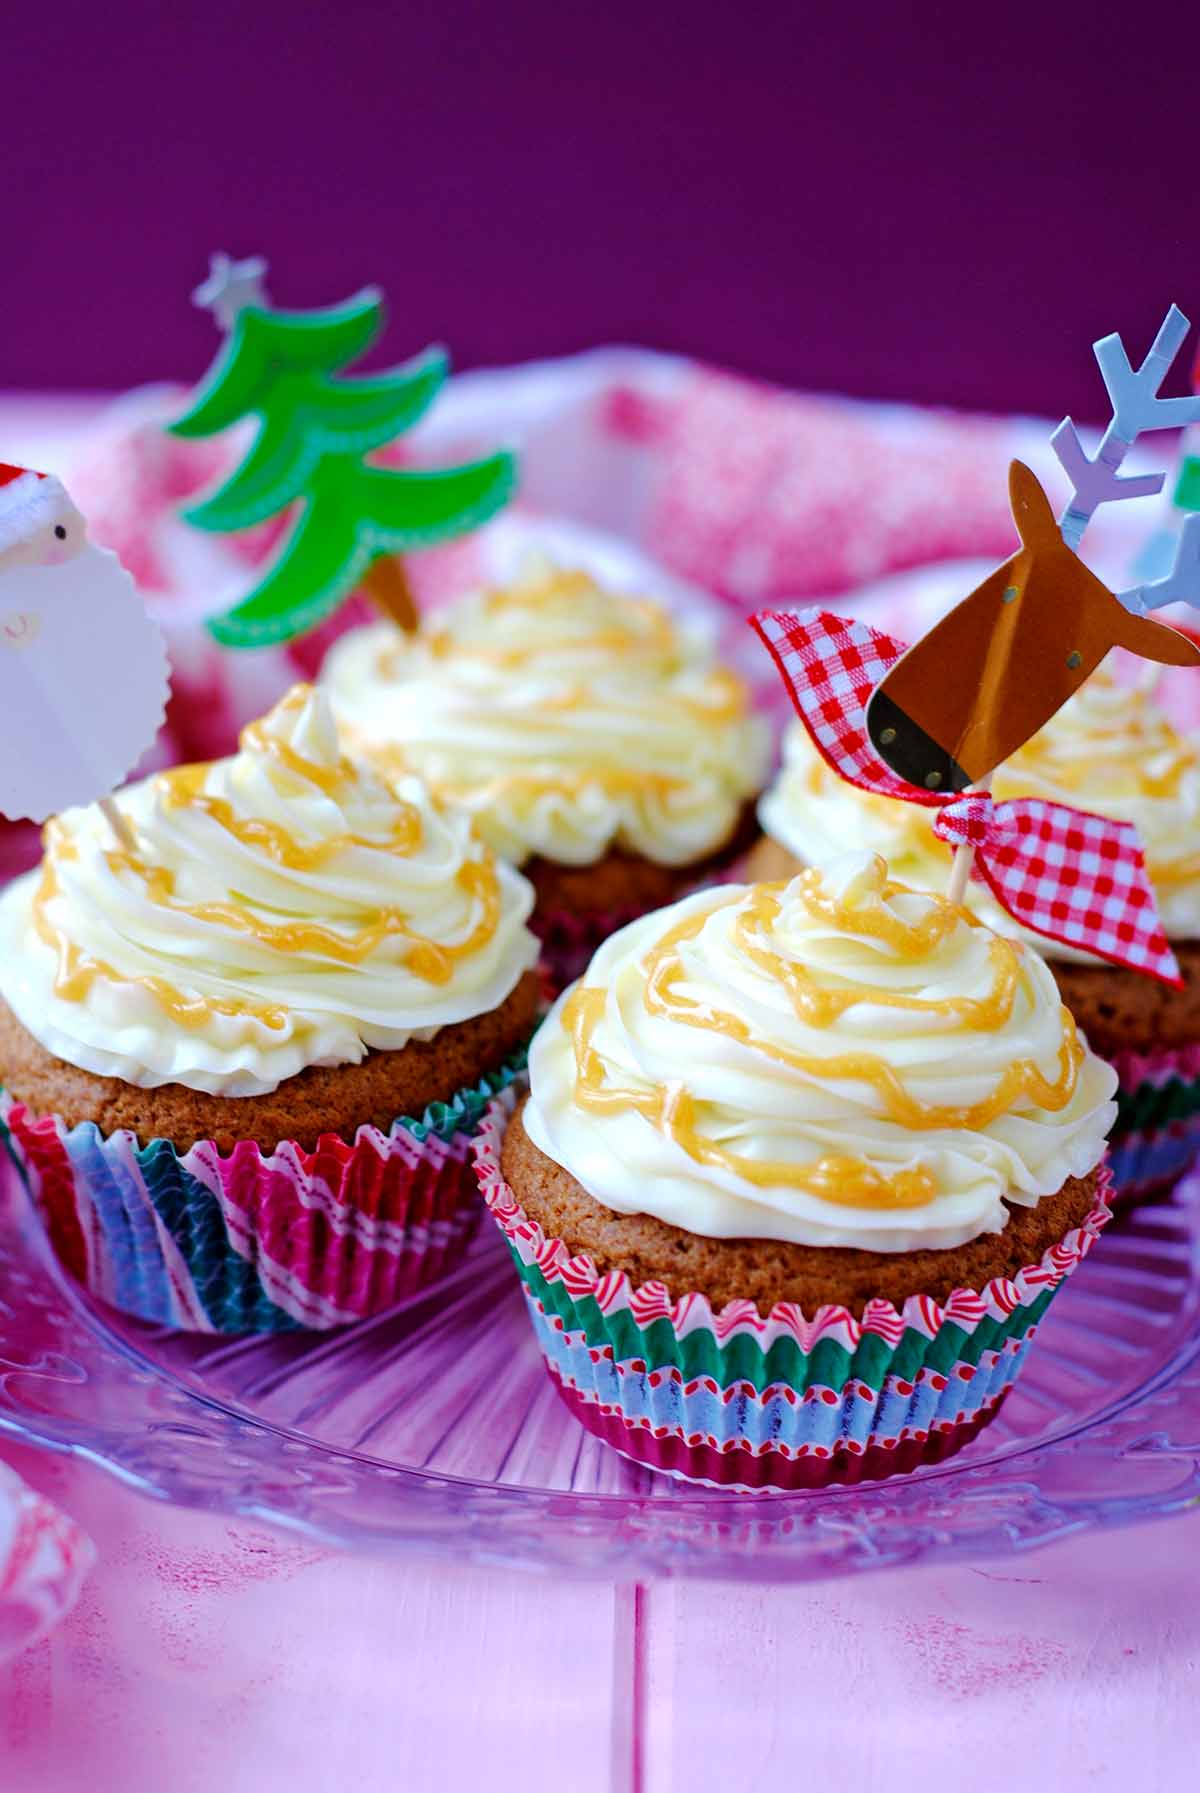 Four cupcakes decorated with Christmas designs.